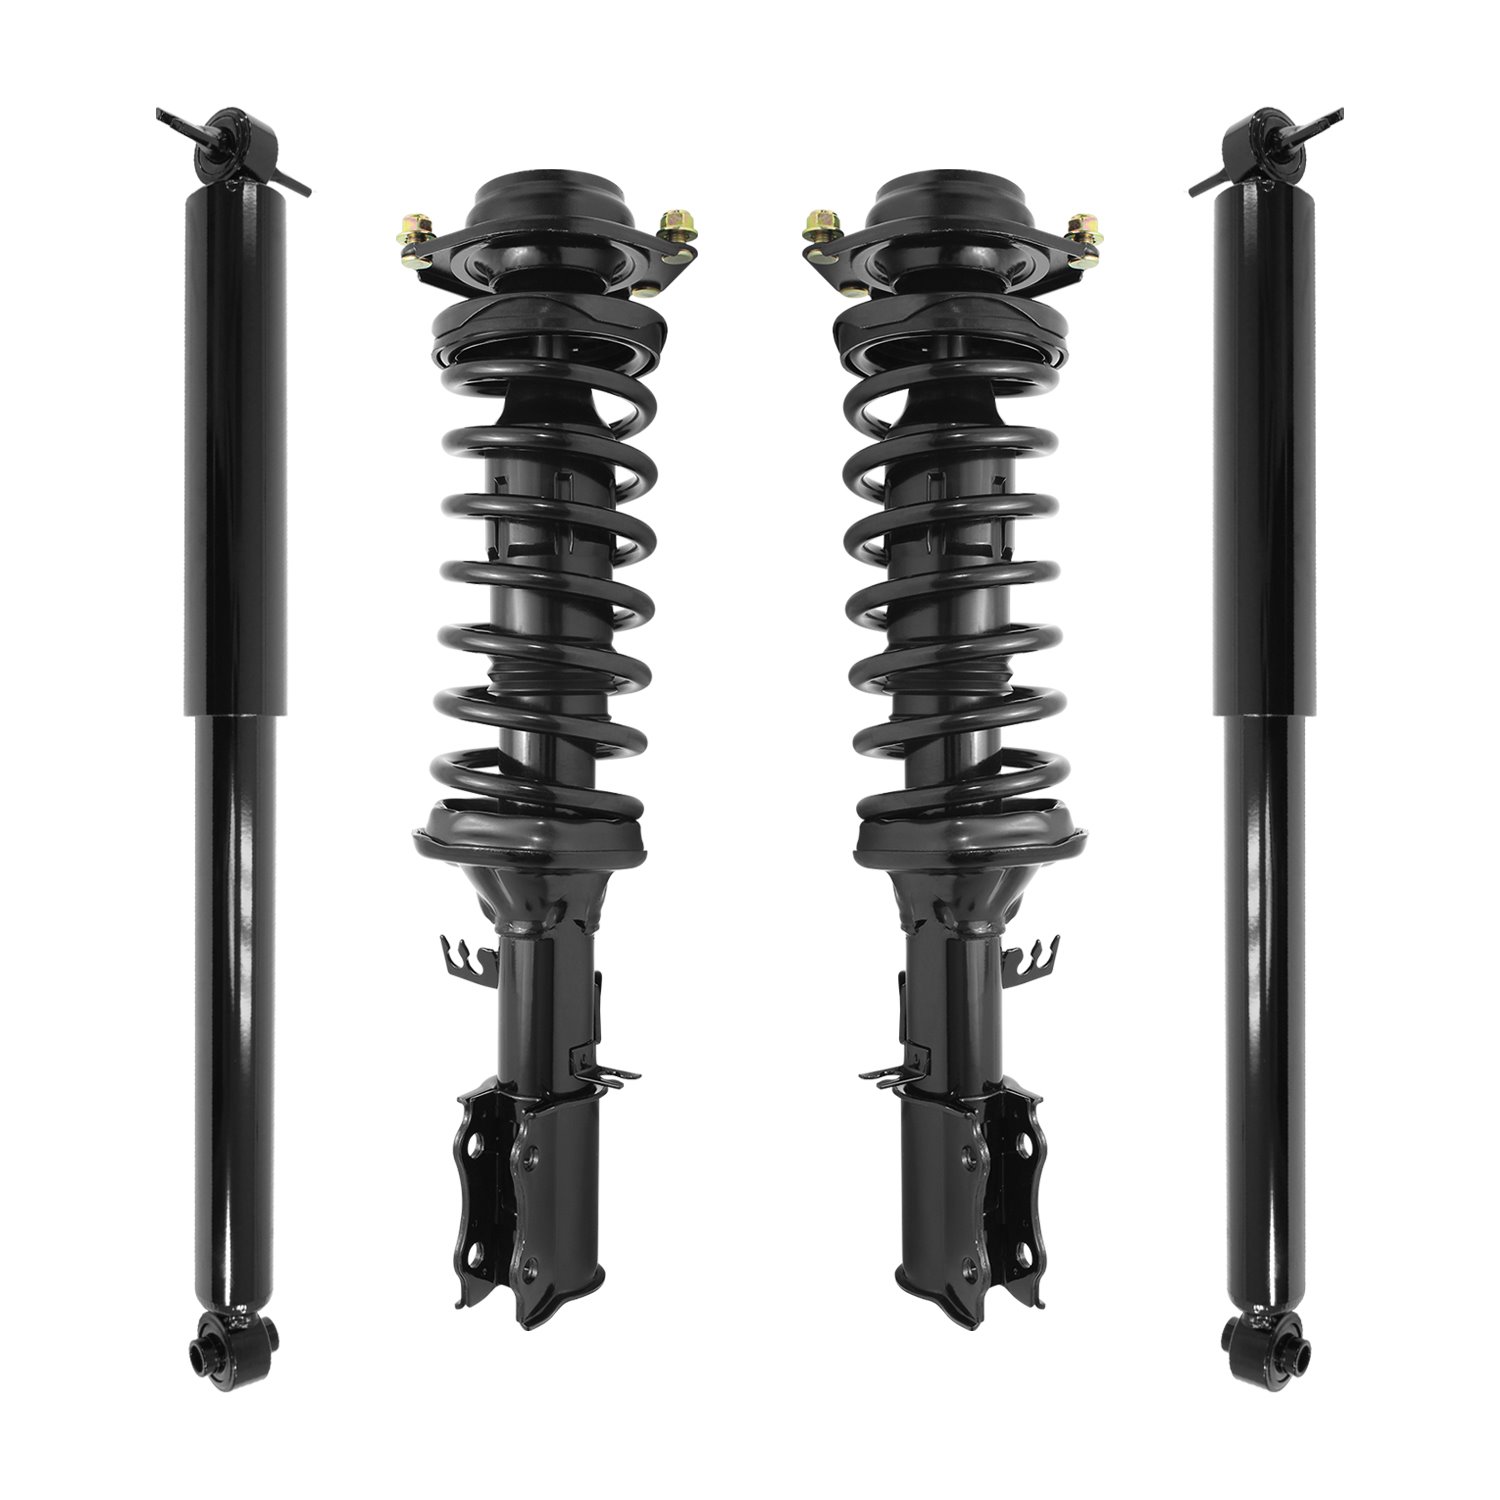 4-11127-259380-001 Front & Rear Suspension Strut & Coil Spring Assembly Fits Select Kia Rio